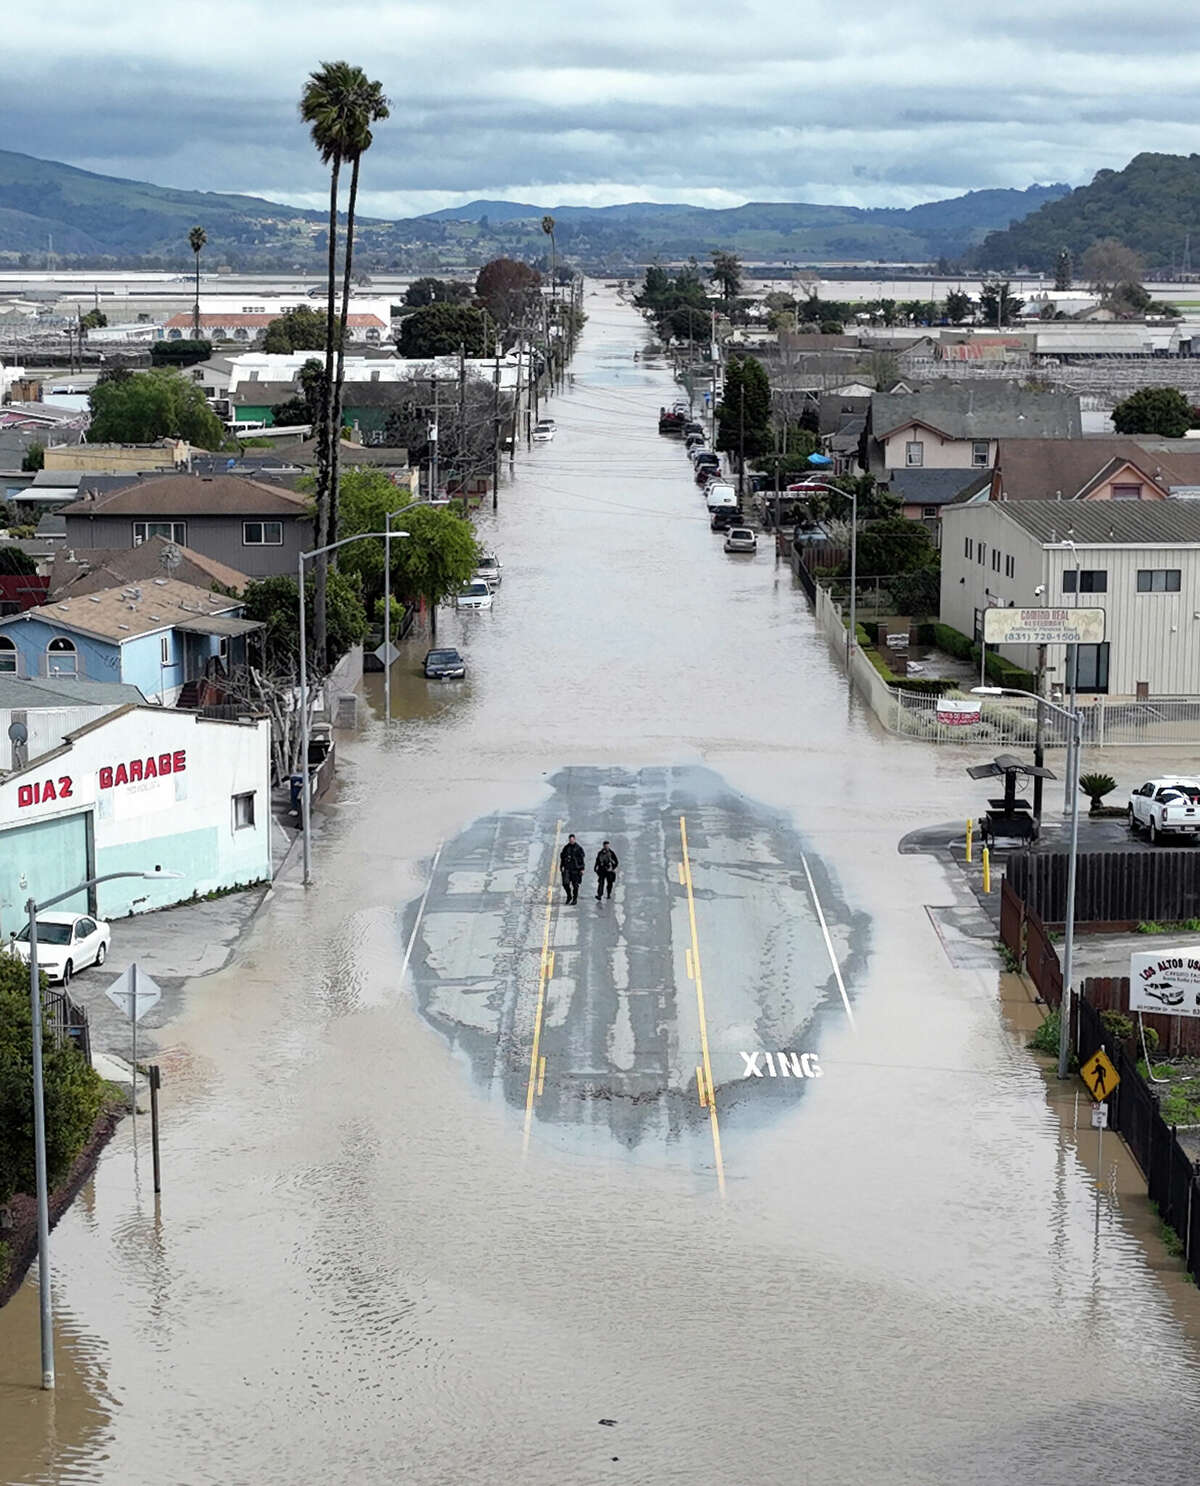 Two individuals stand in a small patch of road emerging from floodwaters in Pajaro, Calif., on Saturday.